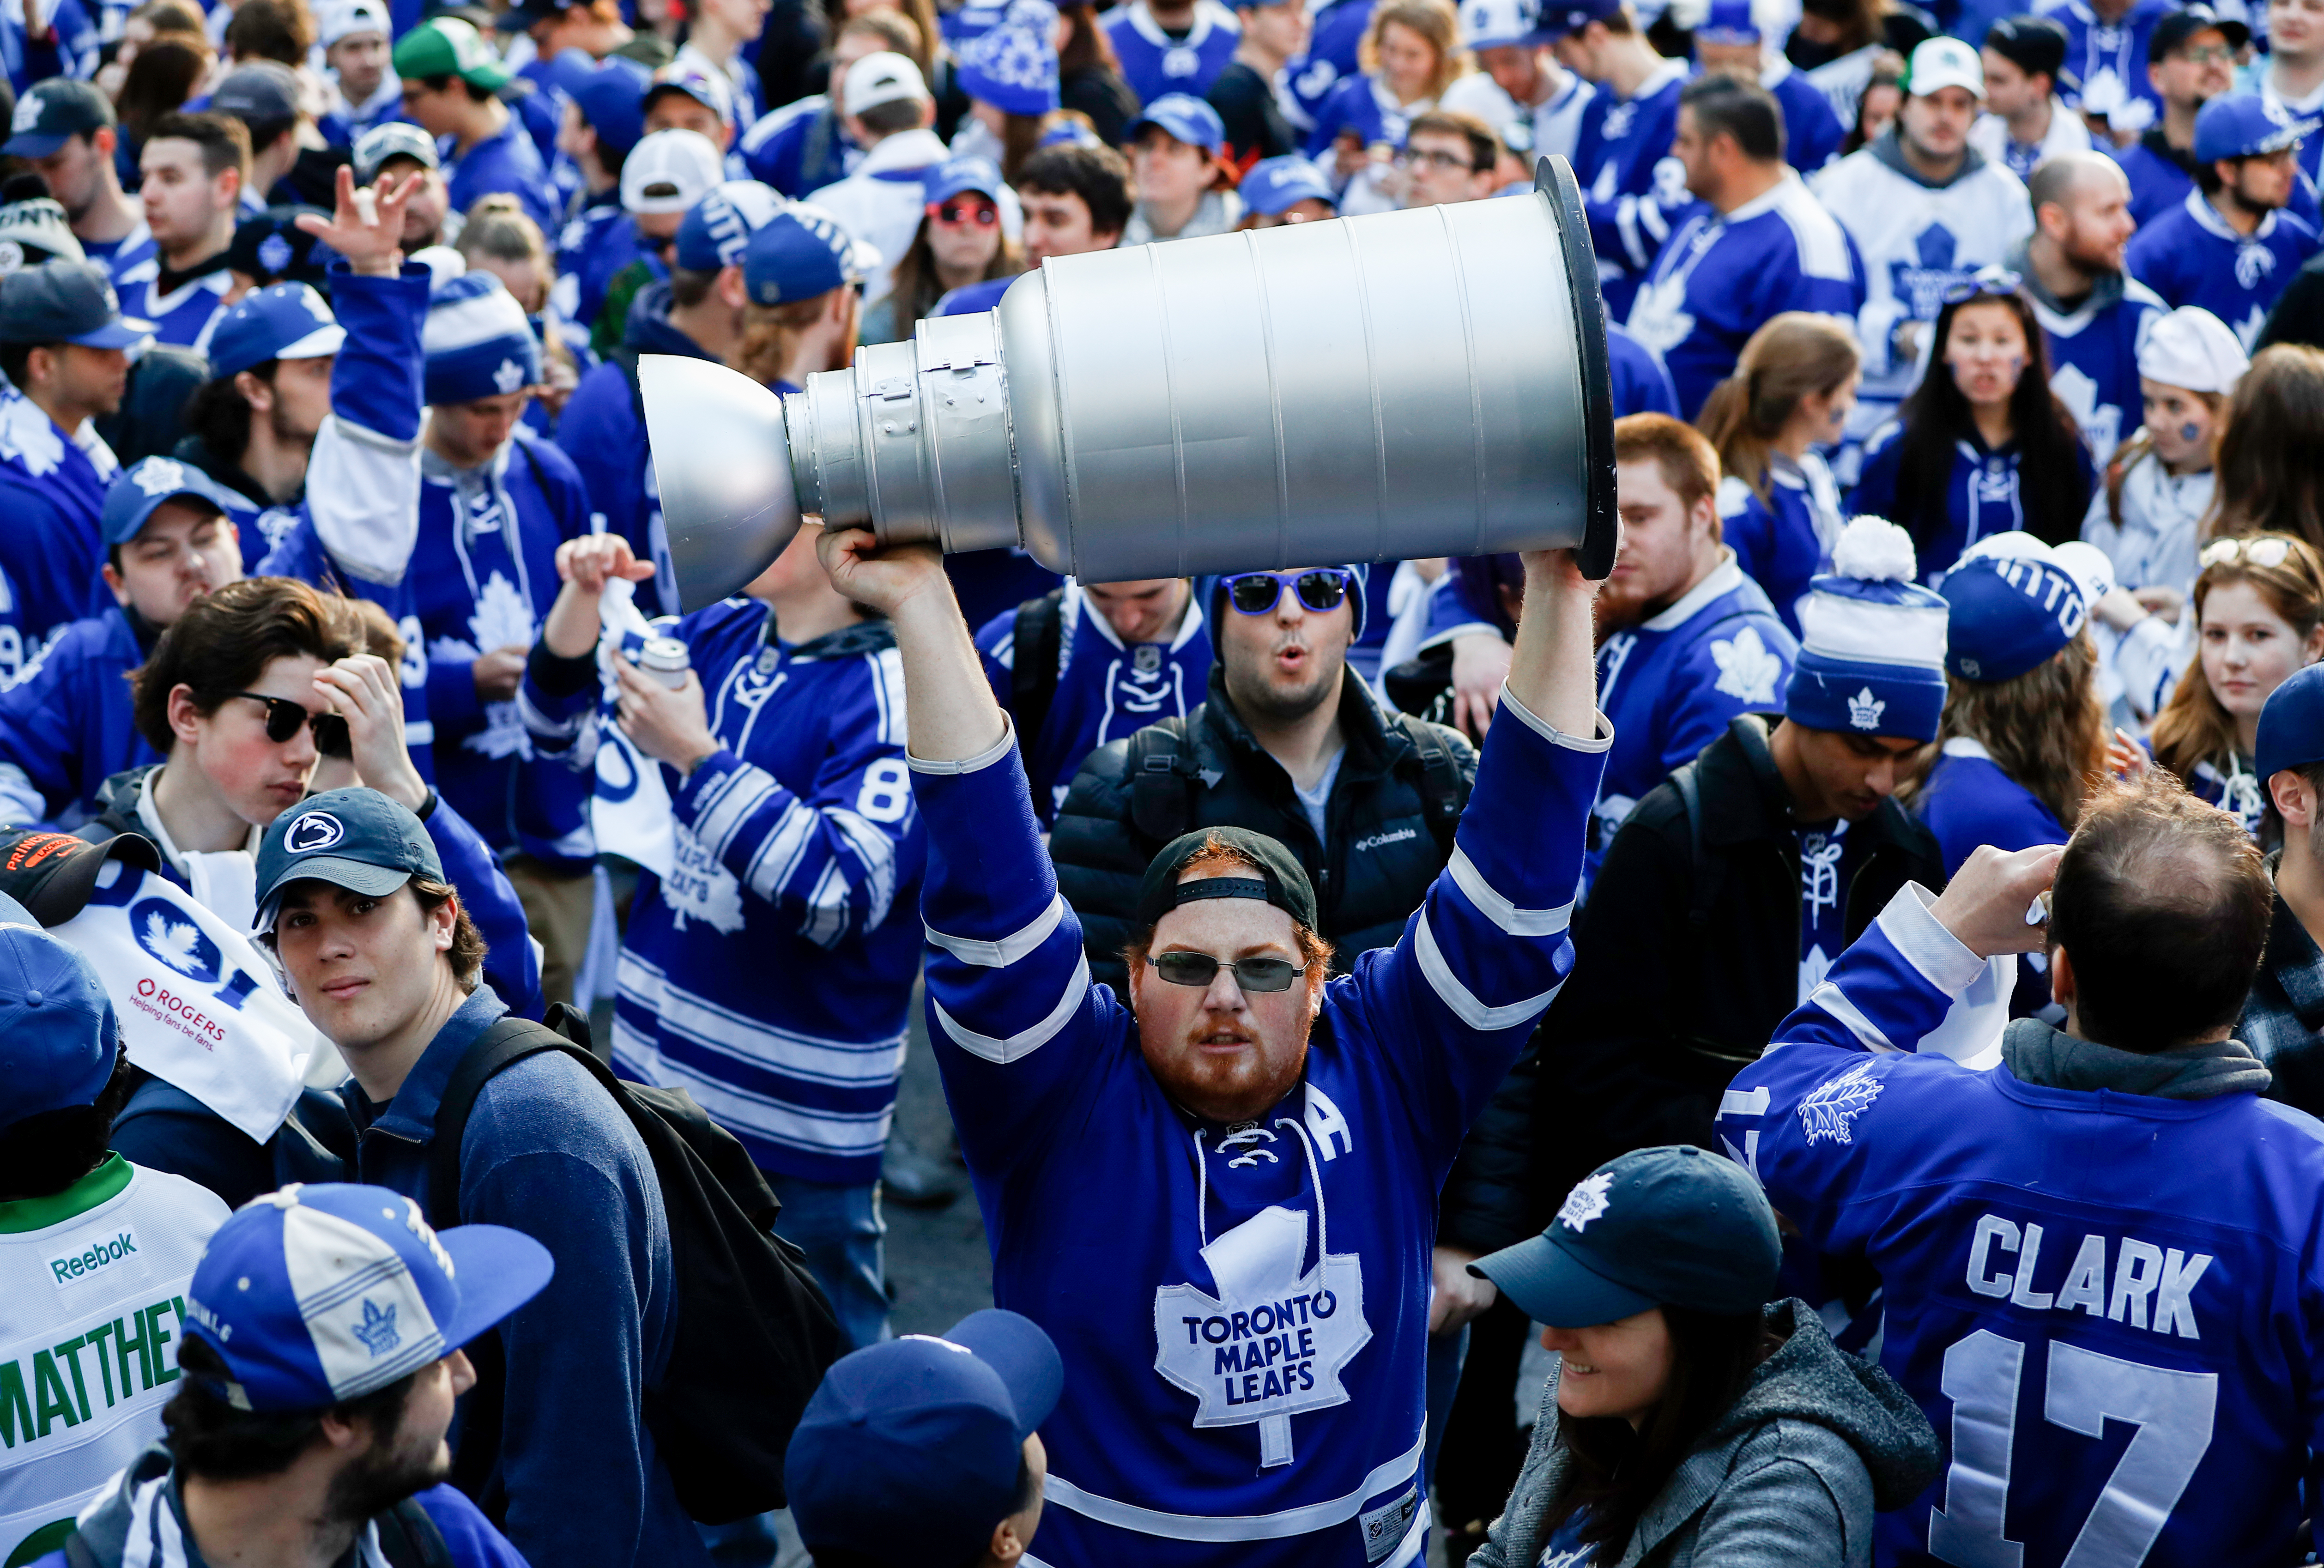 TORONTO, ON - APRIL 17: Fans cheer outside the arena before the Toronto Maple Leafs play the Washington Capitals in Game Three of the Eastern Conference First Round during the 2017 NHL Stanley Cup Playoffs at the Air Canada Centre on April 17, 2017 in Toronto, Ontario, Canada. (Photo by Mark Blinch/NHLI via Getty Images)